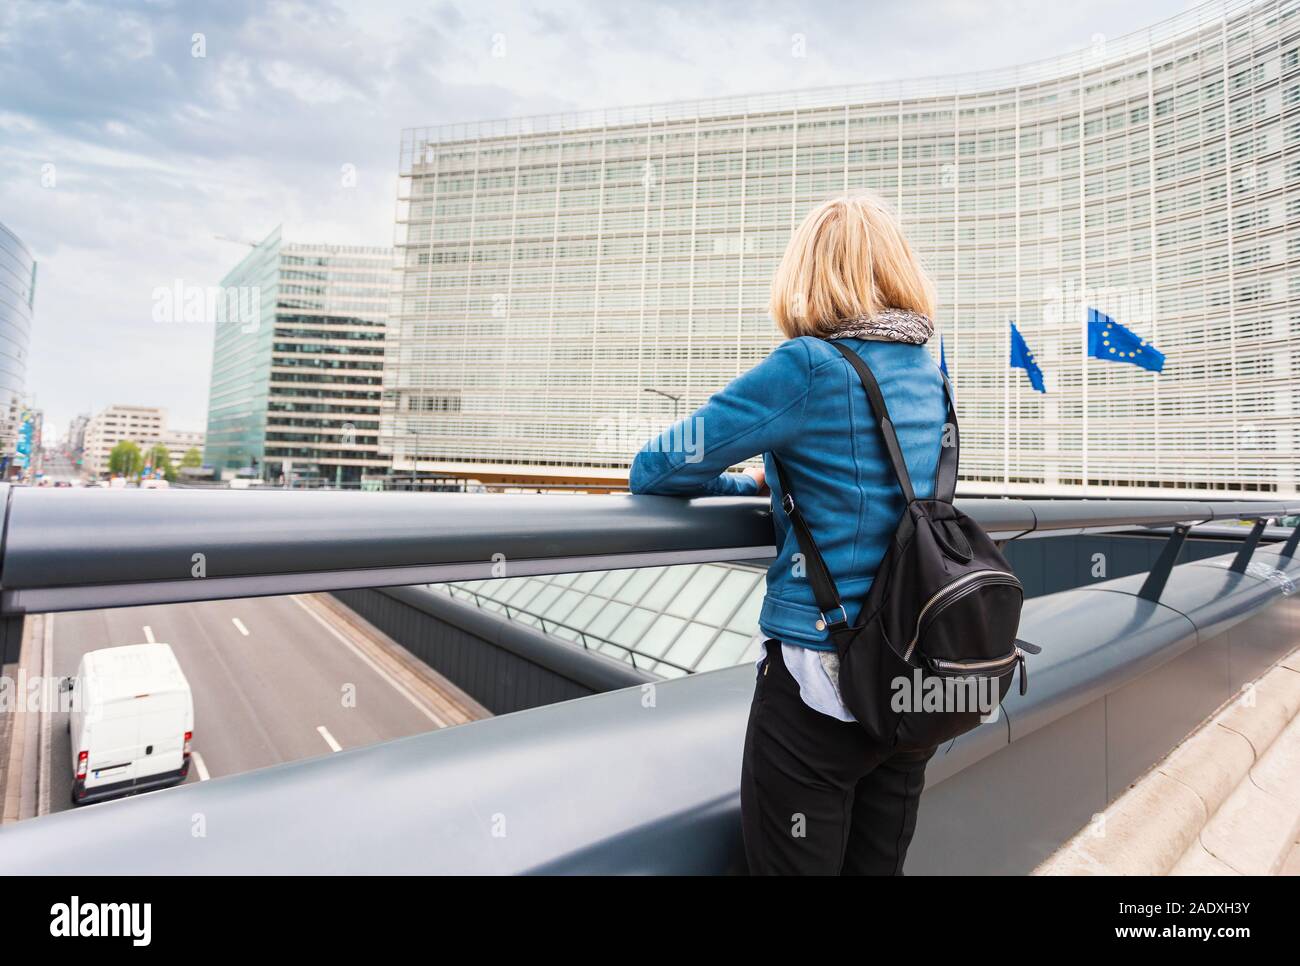 A young woman stands against the backdrop of the European Commission headquarters in Brussels, Belgium Stock Photo